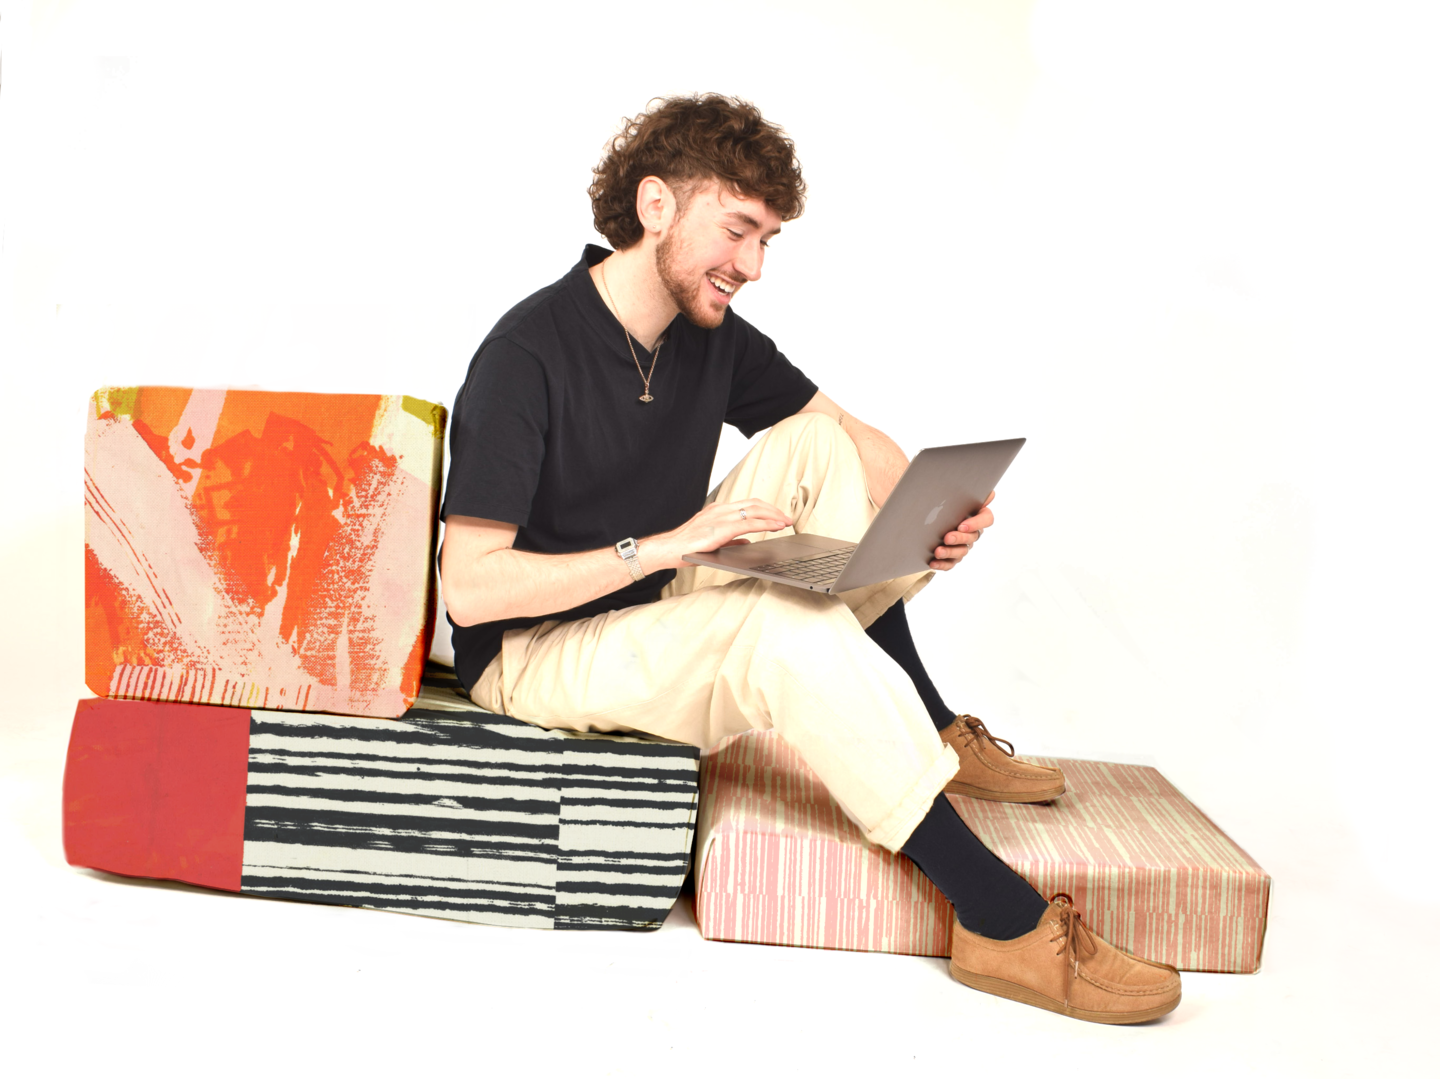 Smiling man sits on colourful patterned blocks in a composition similar to a bed, he types on laptop on knees.